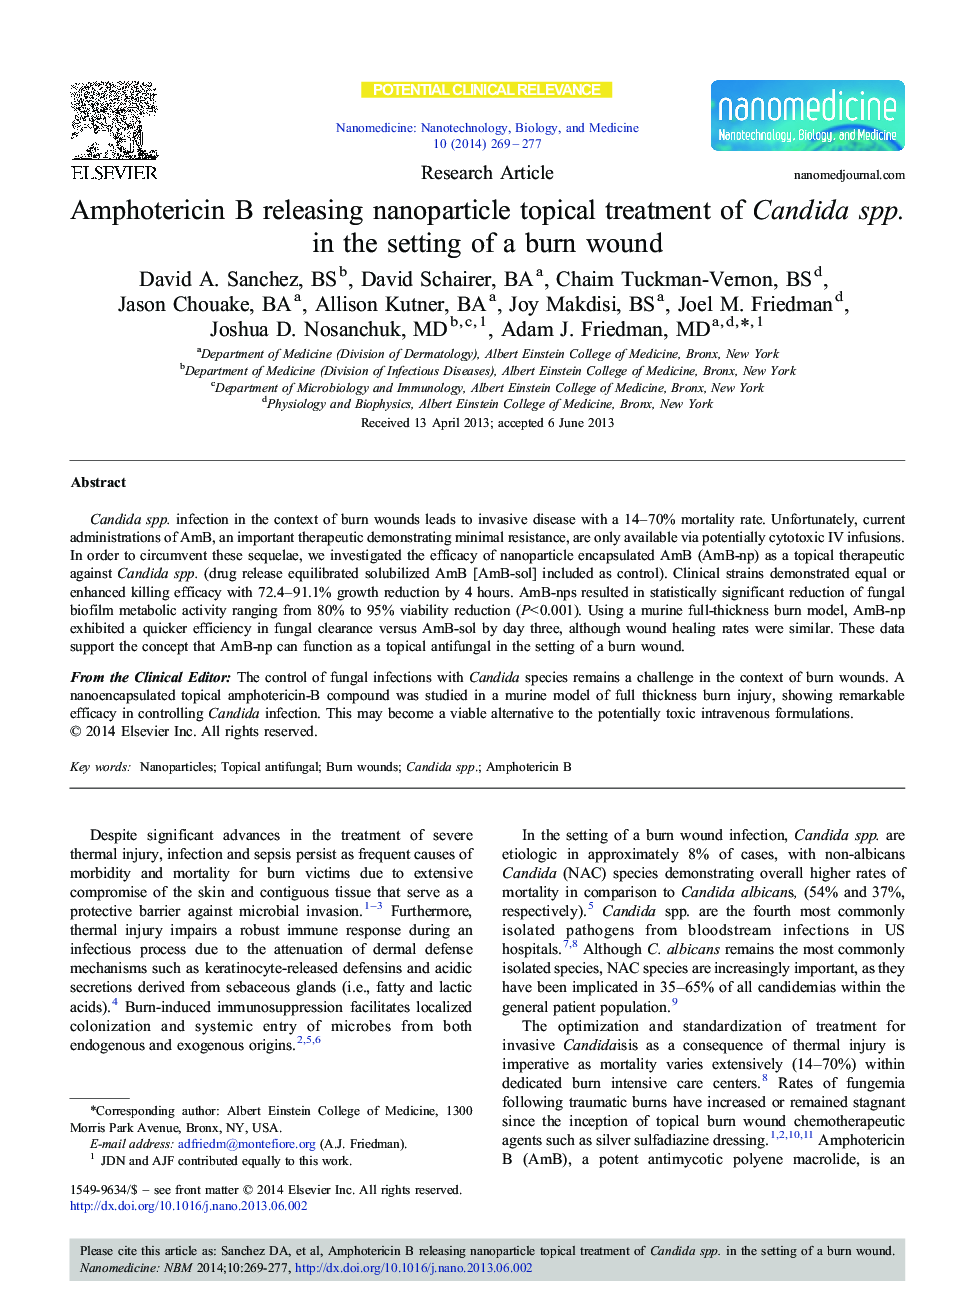 Amphotericin B releasing nanoparticle topical treatment of Candida spp. in the setting of a burn wound